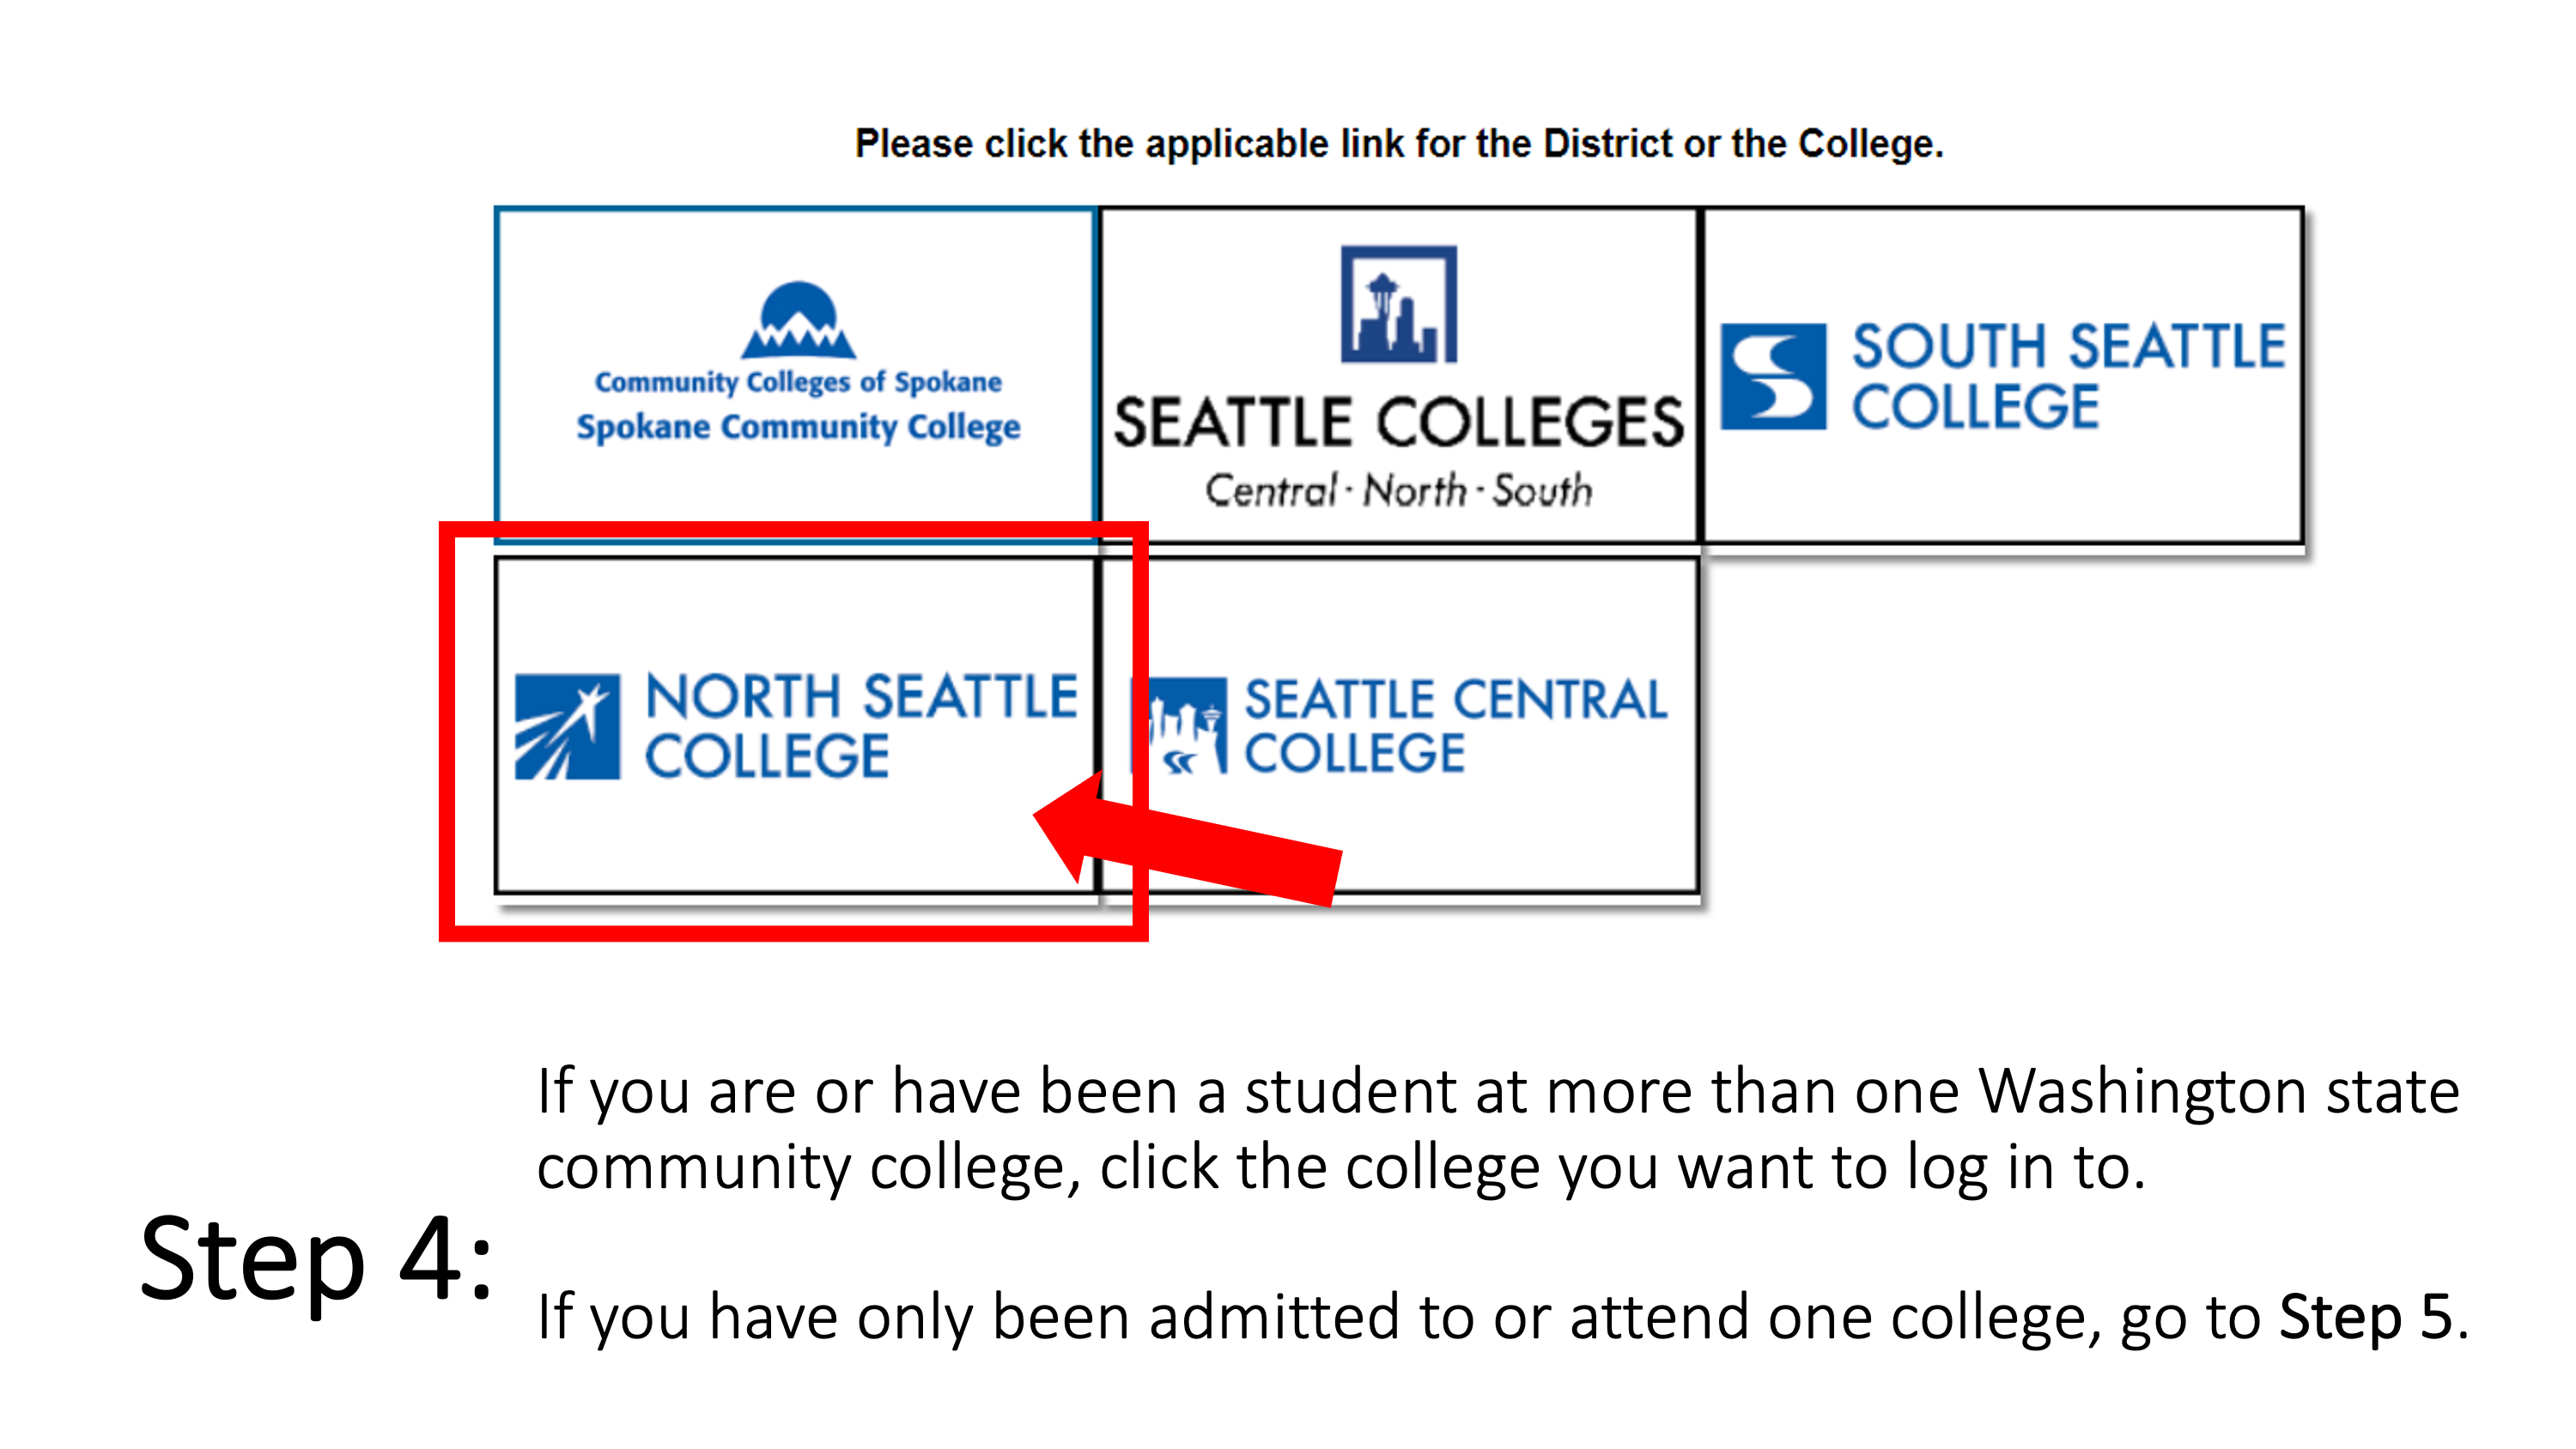 f you are or have been a student at more than one Washington state community college, click the college you want to log in to. If you have only been admitted to or attend one college, go to Step 5.